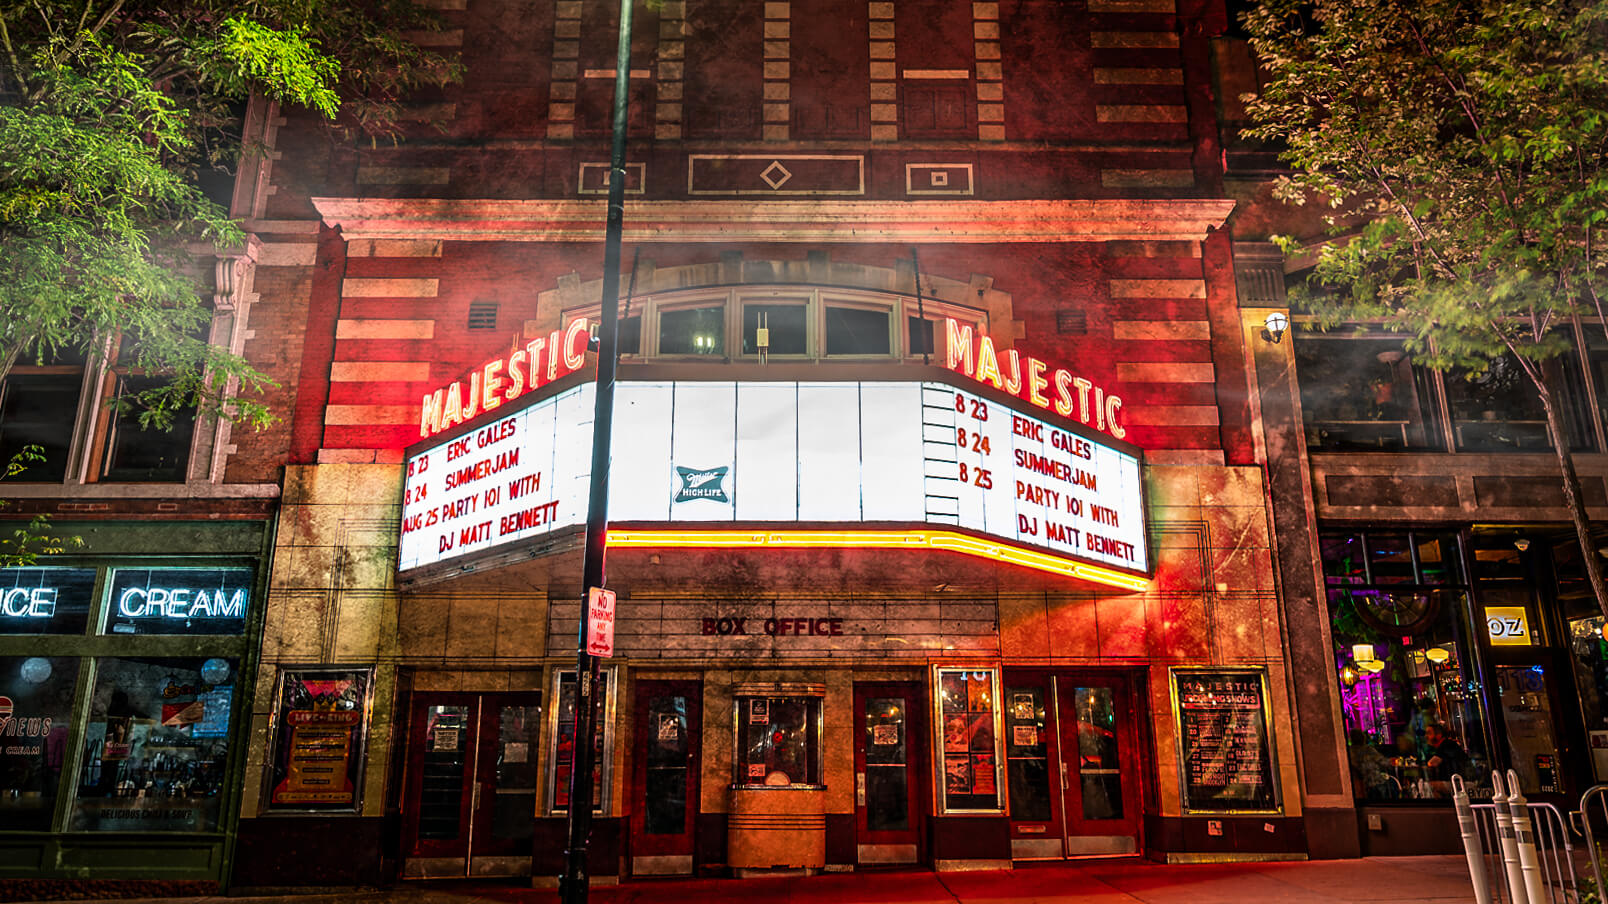 The Majestic Theater